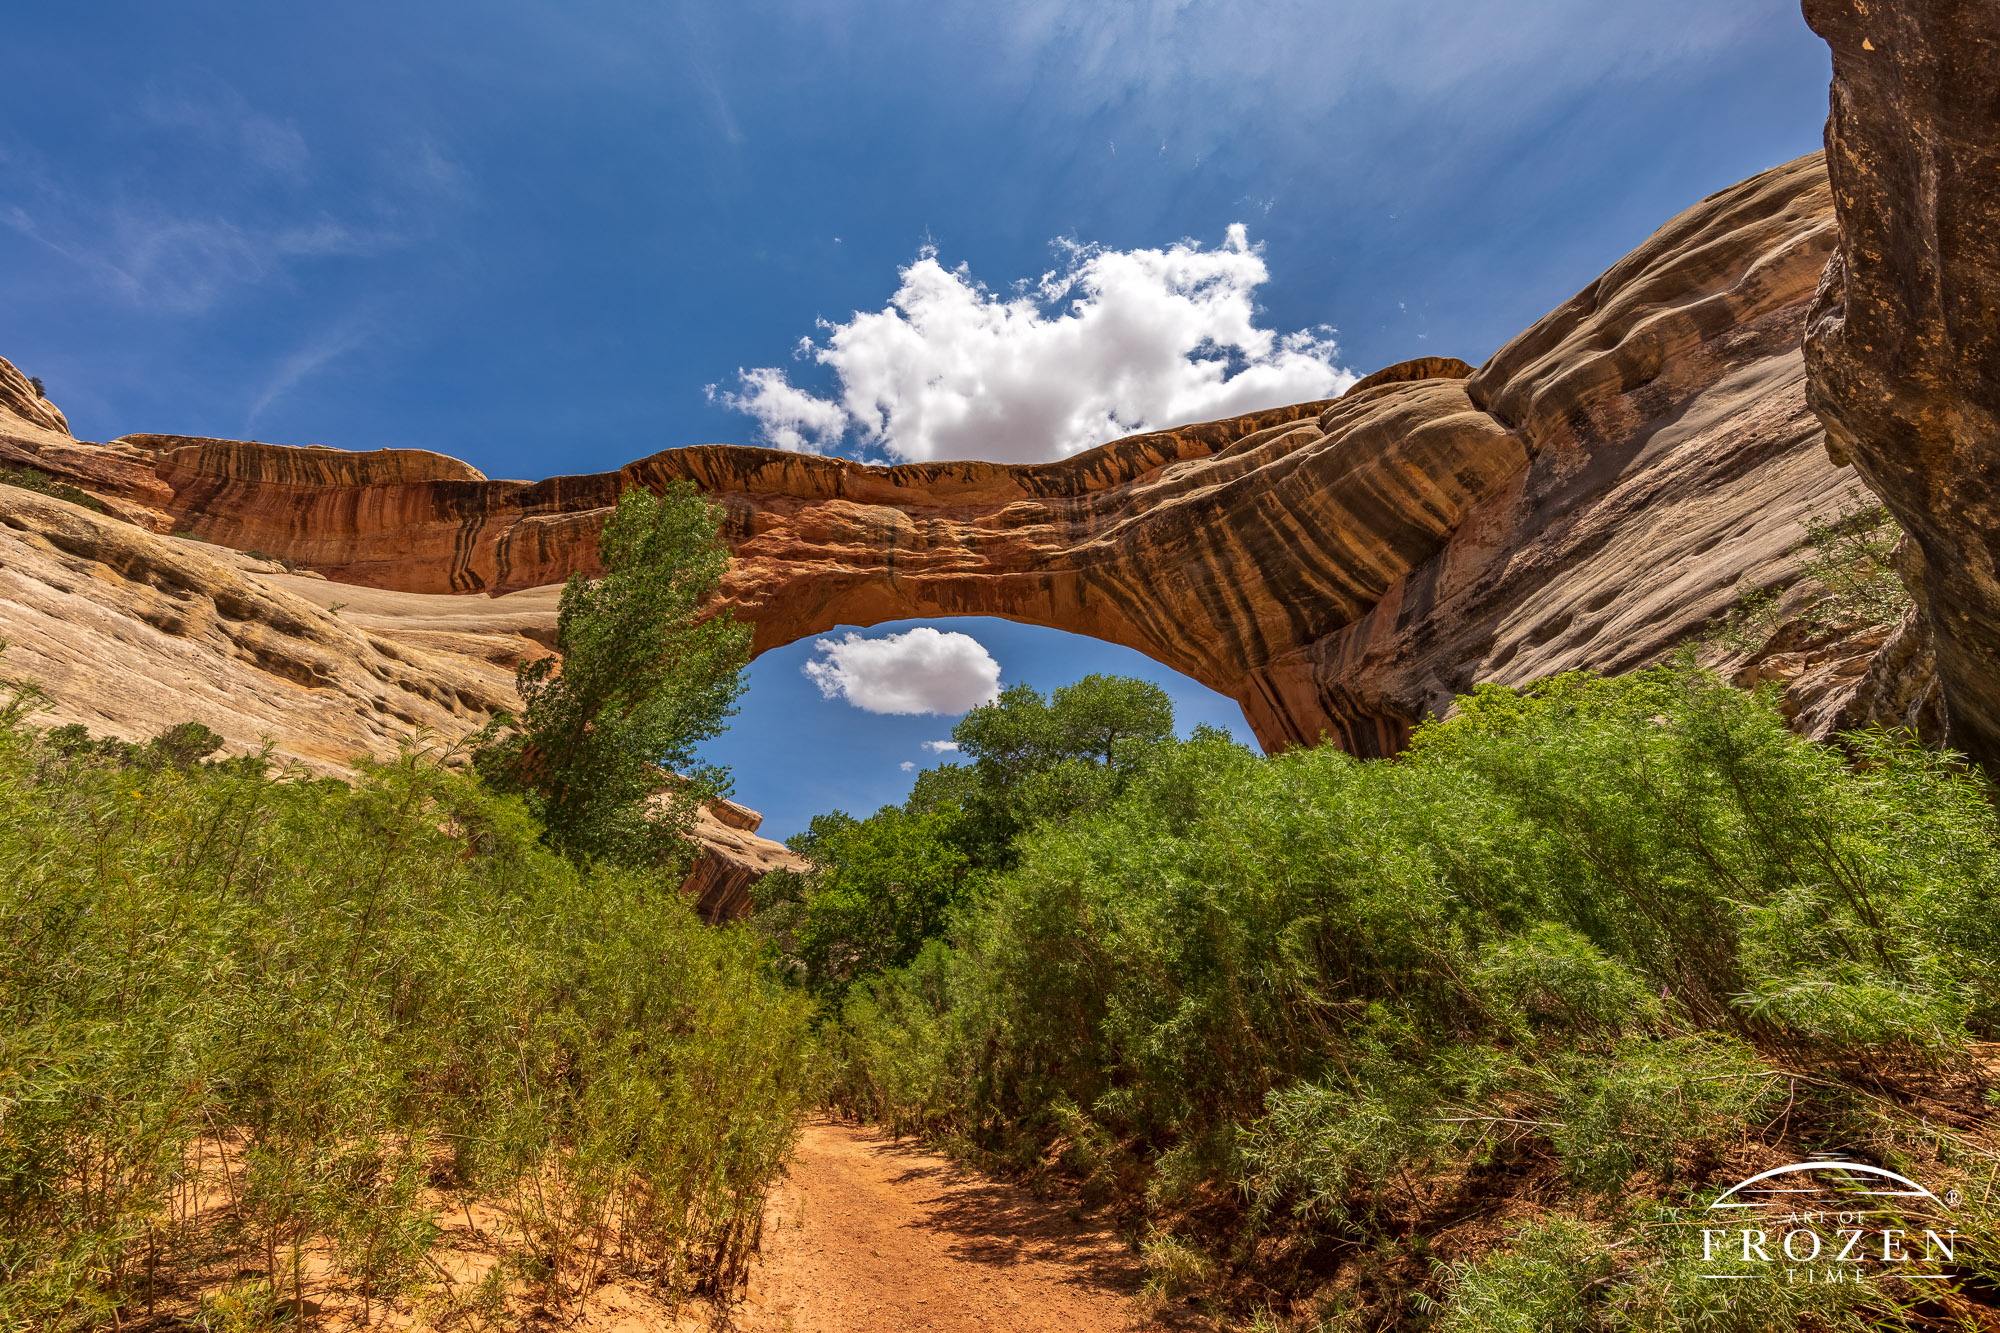 View of the Sipapu Natural Bridge from inside Natural Bridges National Monument where the stone arch spans the blue skies